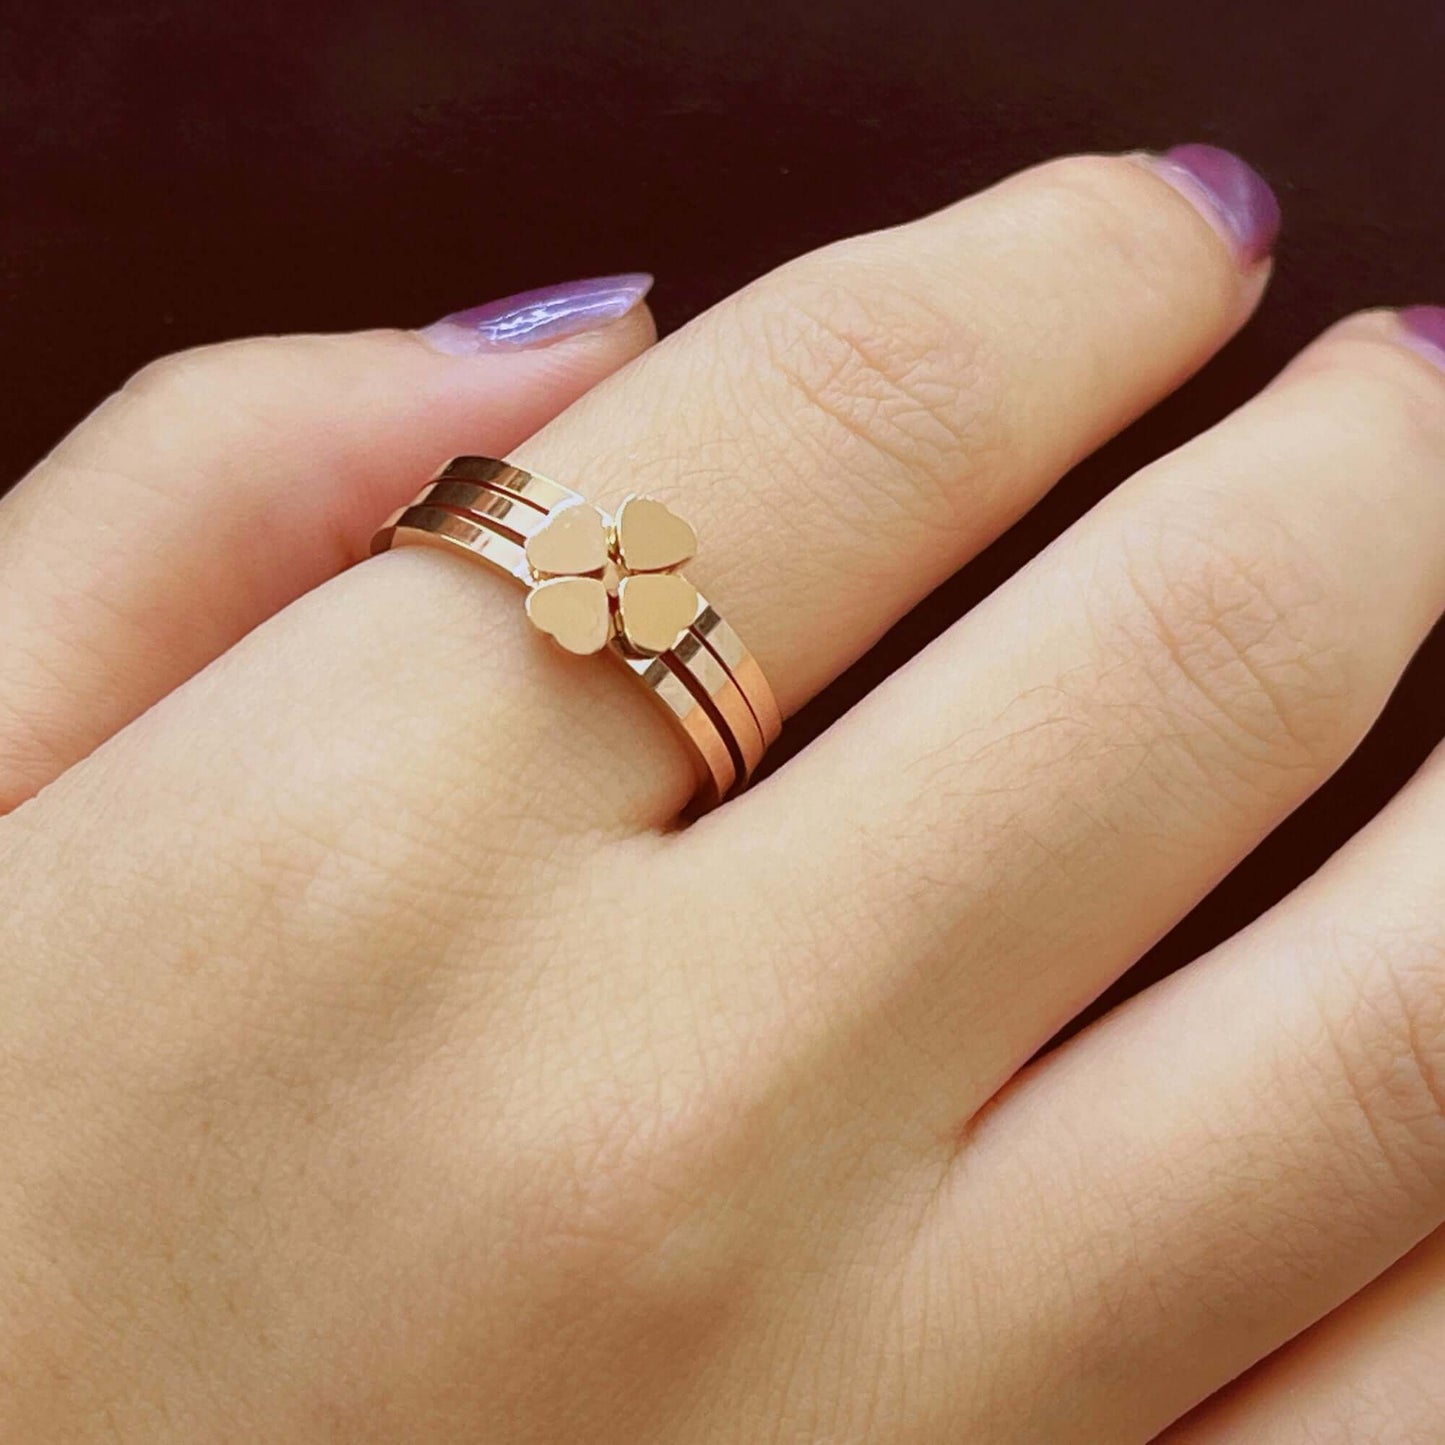 3 Pcs Stackable Heart Clover Ring Set in Rose Gold, 3 Pcs Ring Four-leaf Clover Ring for Women, Three-in-one Ring,